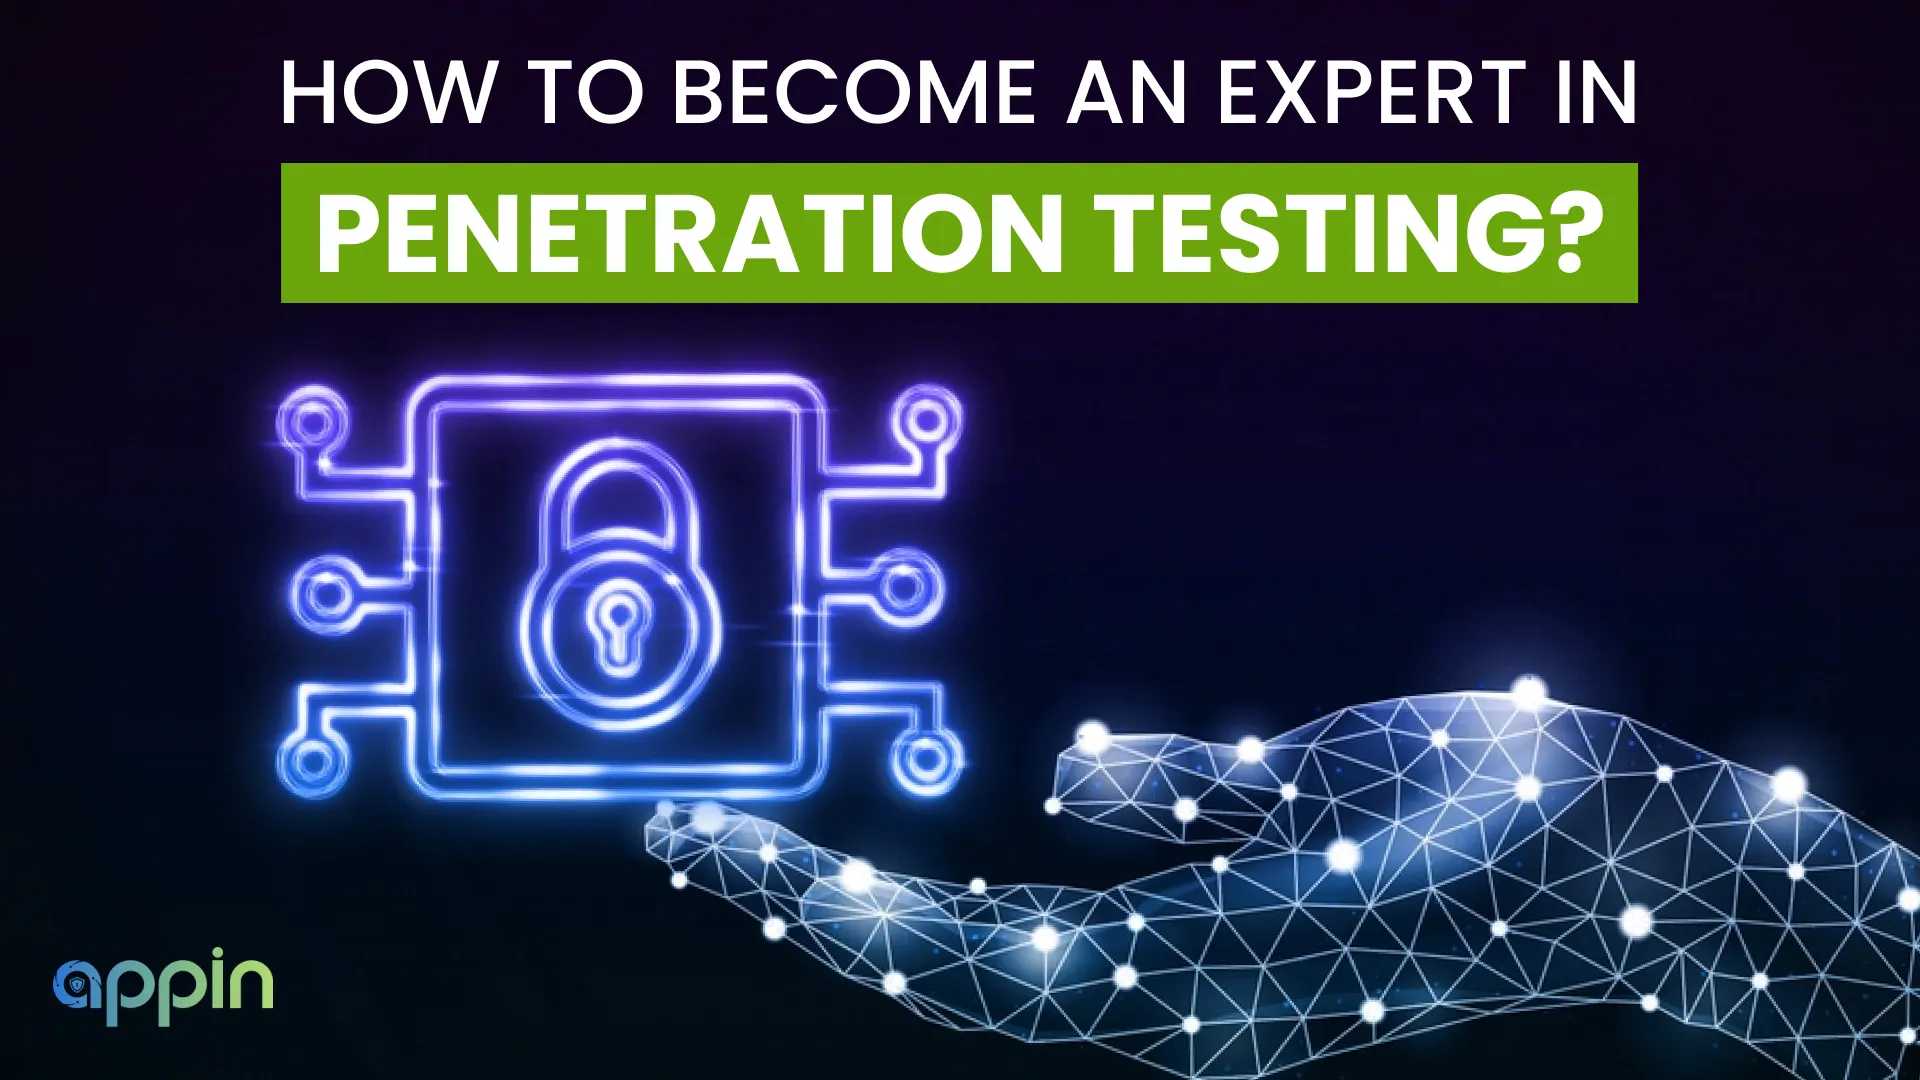 How to become an expert in penetration testing